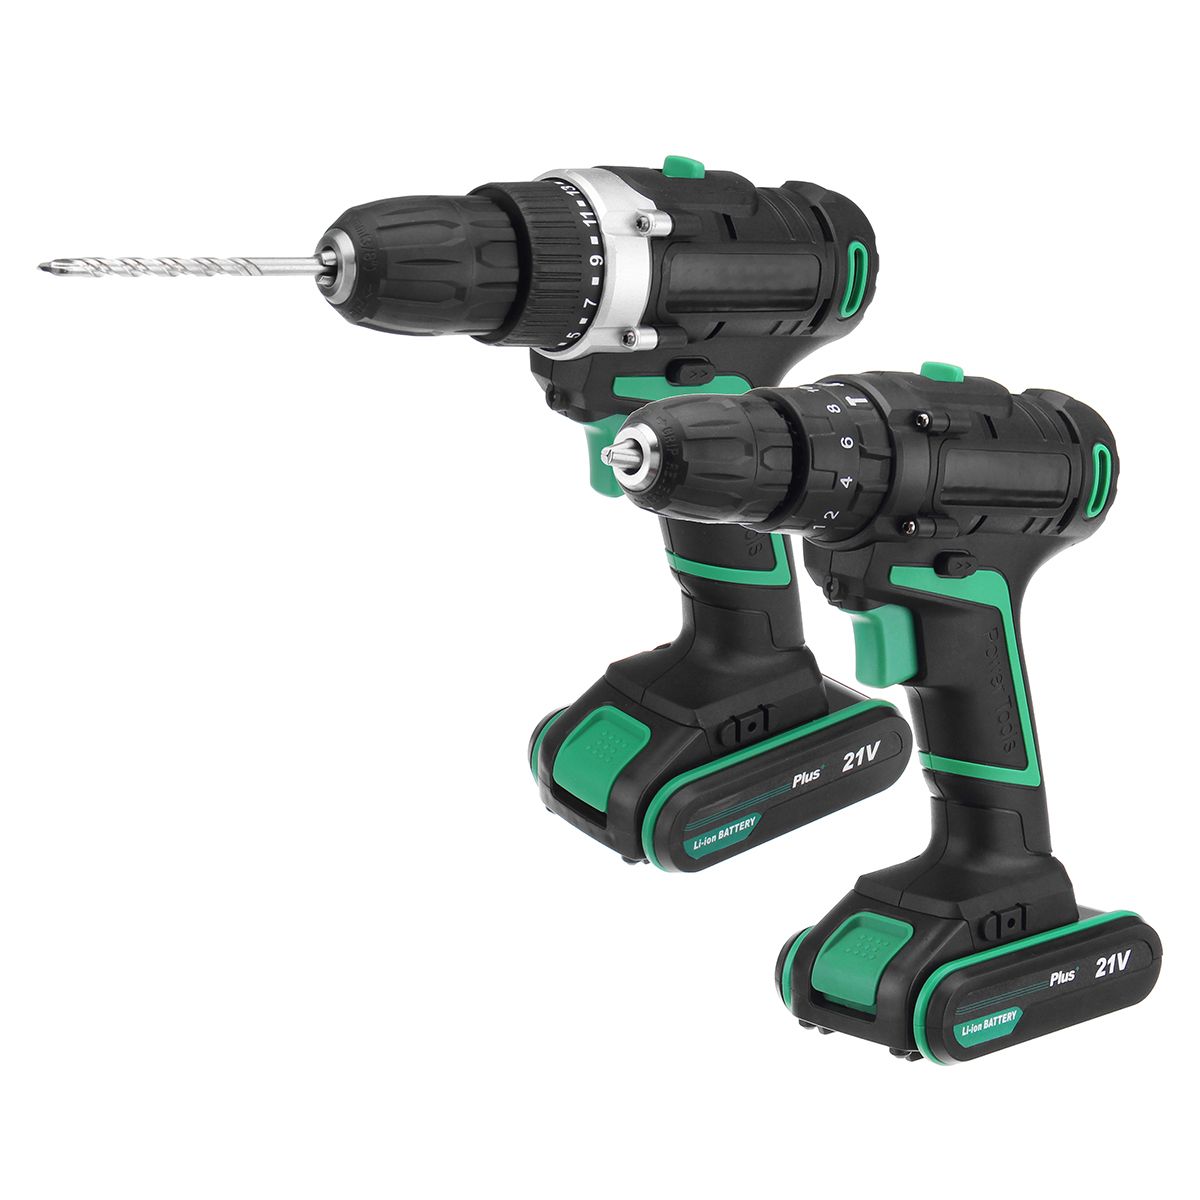 AC100-240V-Li-ion-Cordless-Electric-Screwdriver-Power-Drills-1-Battery-1-Charger-With-Accessories-1285827